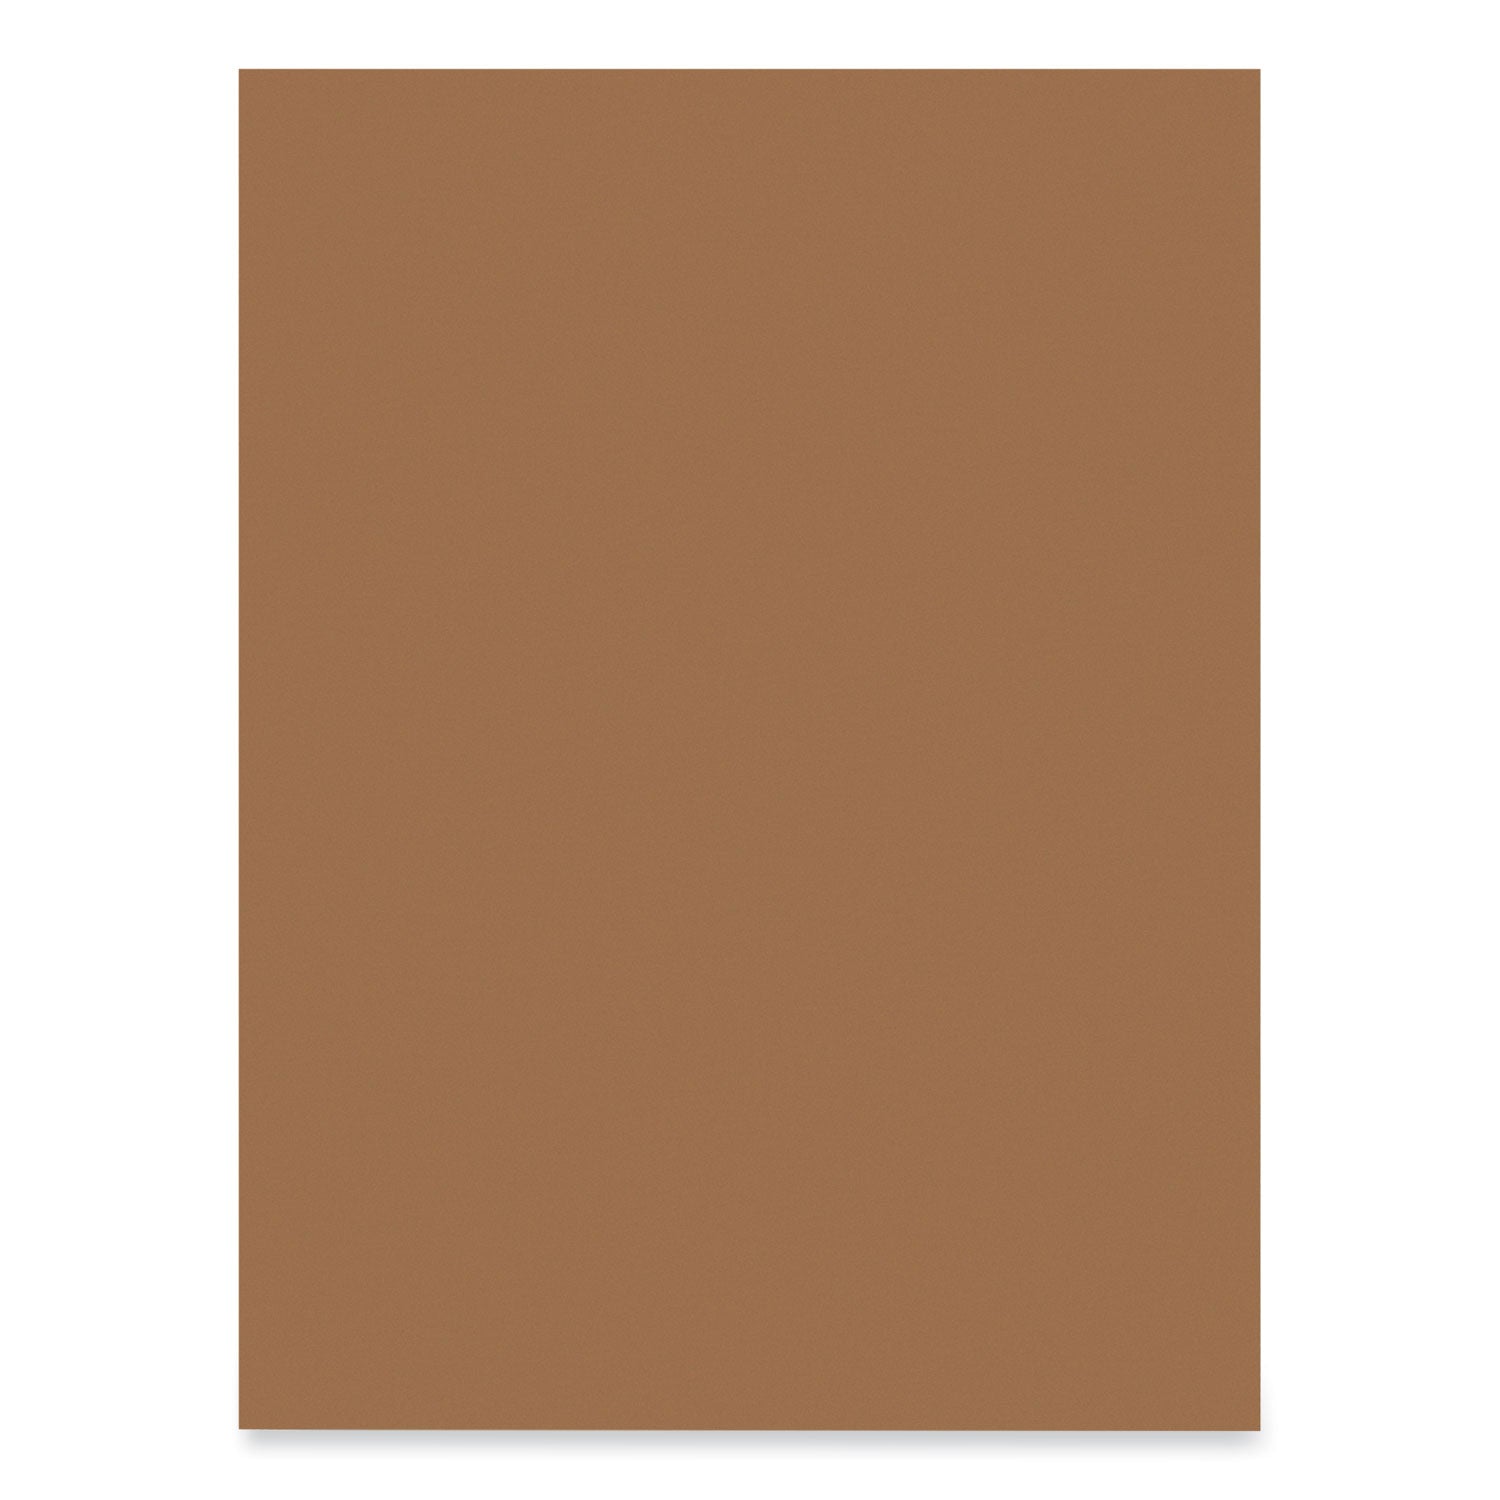 SunWorks Construction Paper, 50 lb Text Weight, 9 x 12, Light Brown, 50/Pack - 